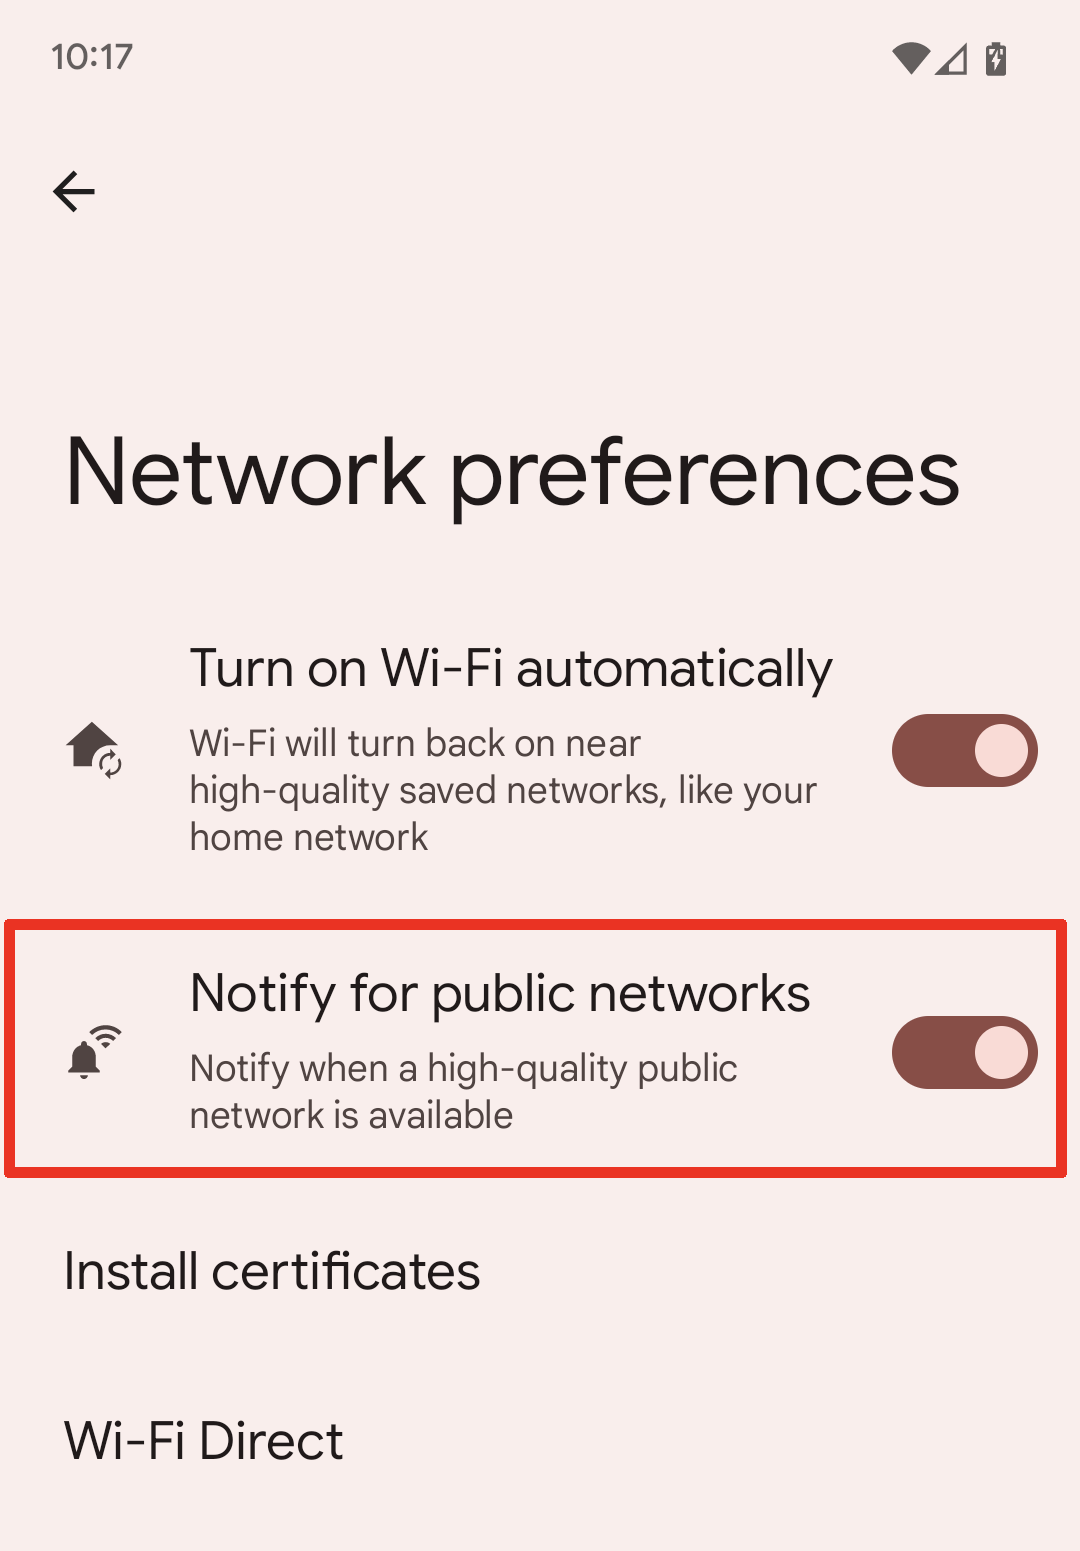 Notify for public networks feature